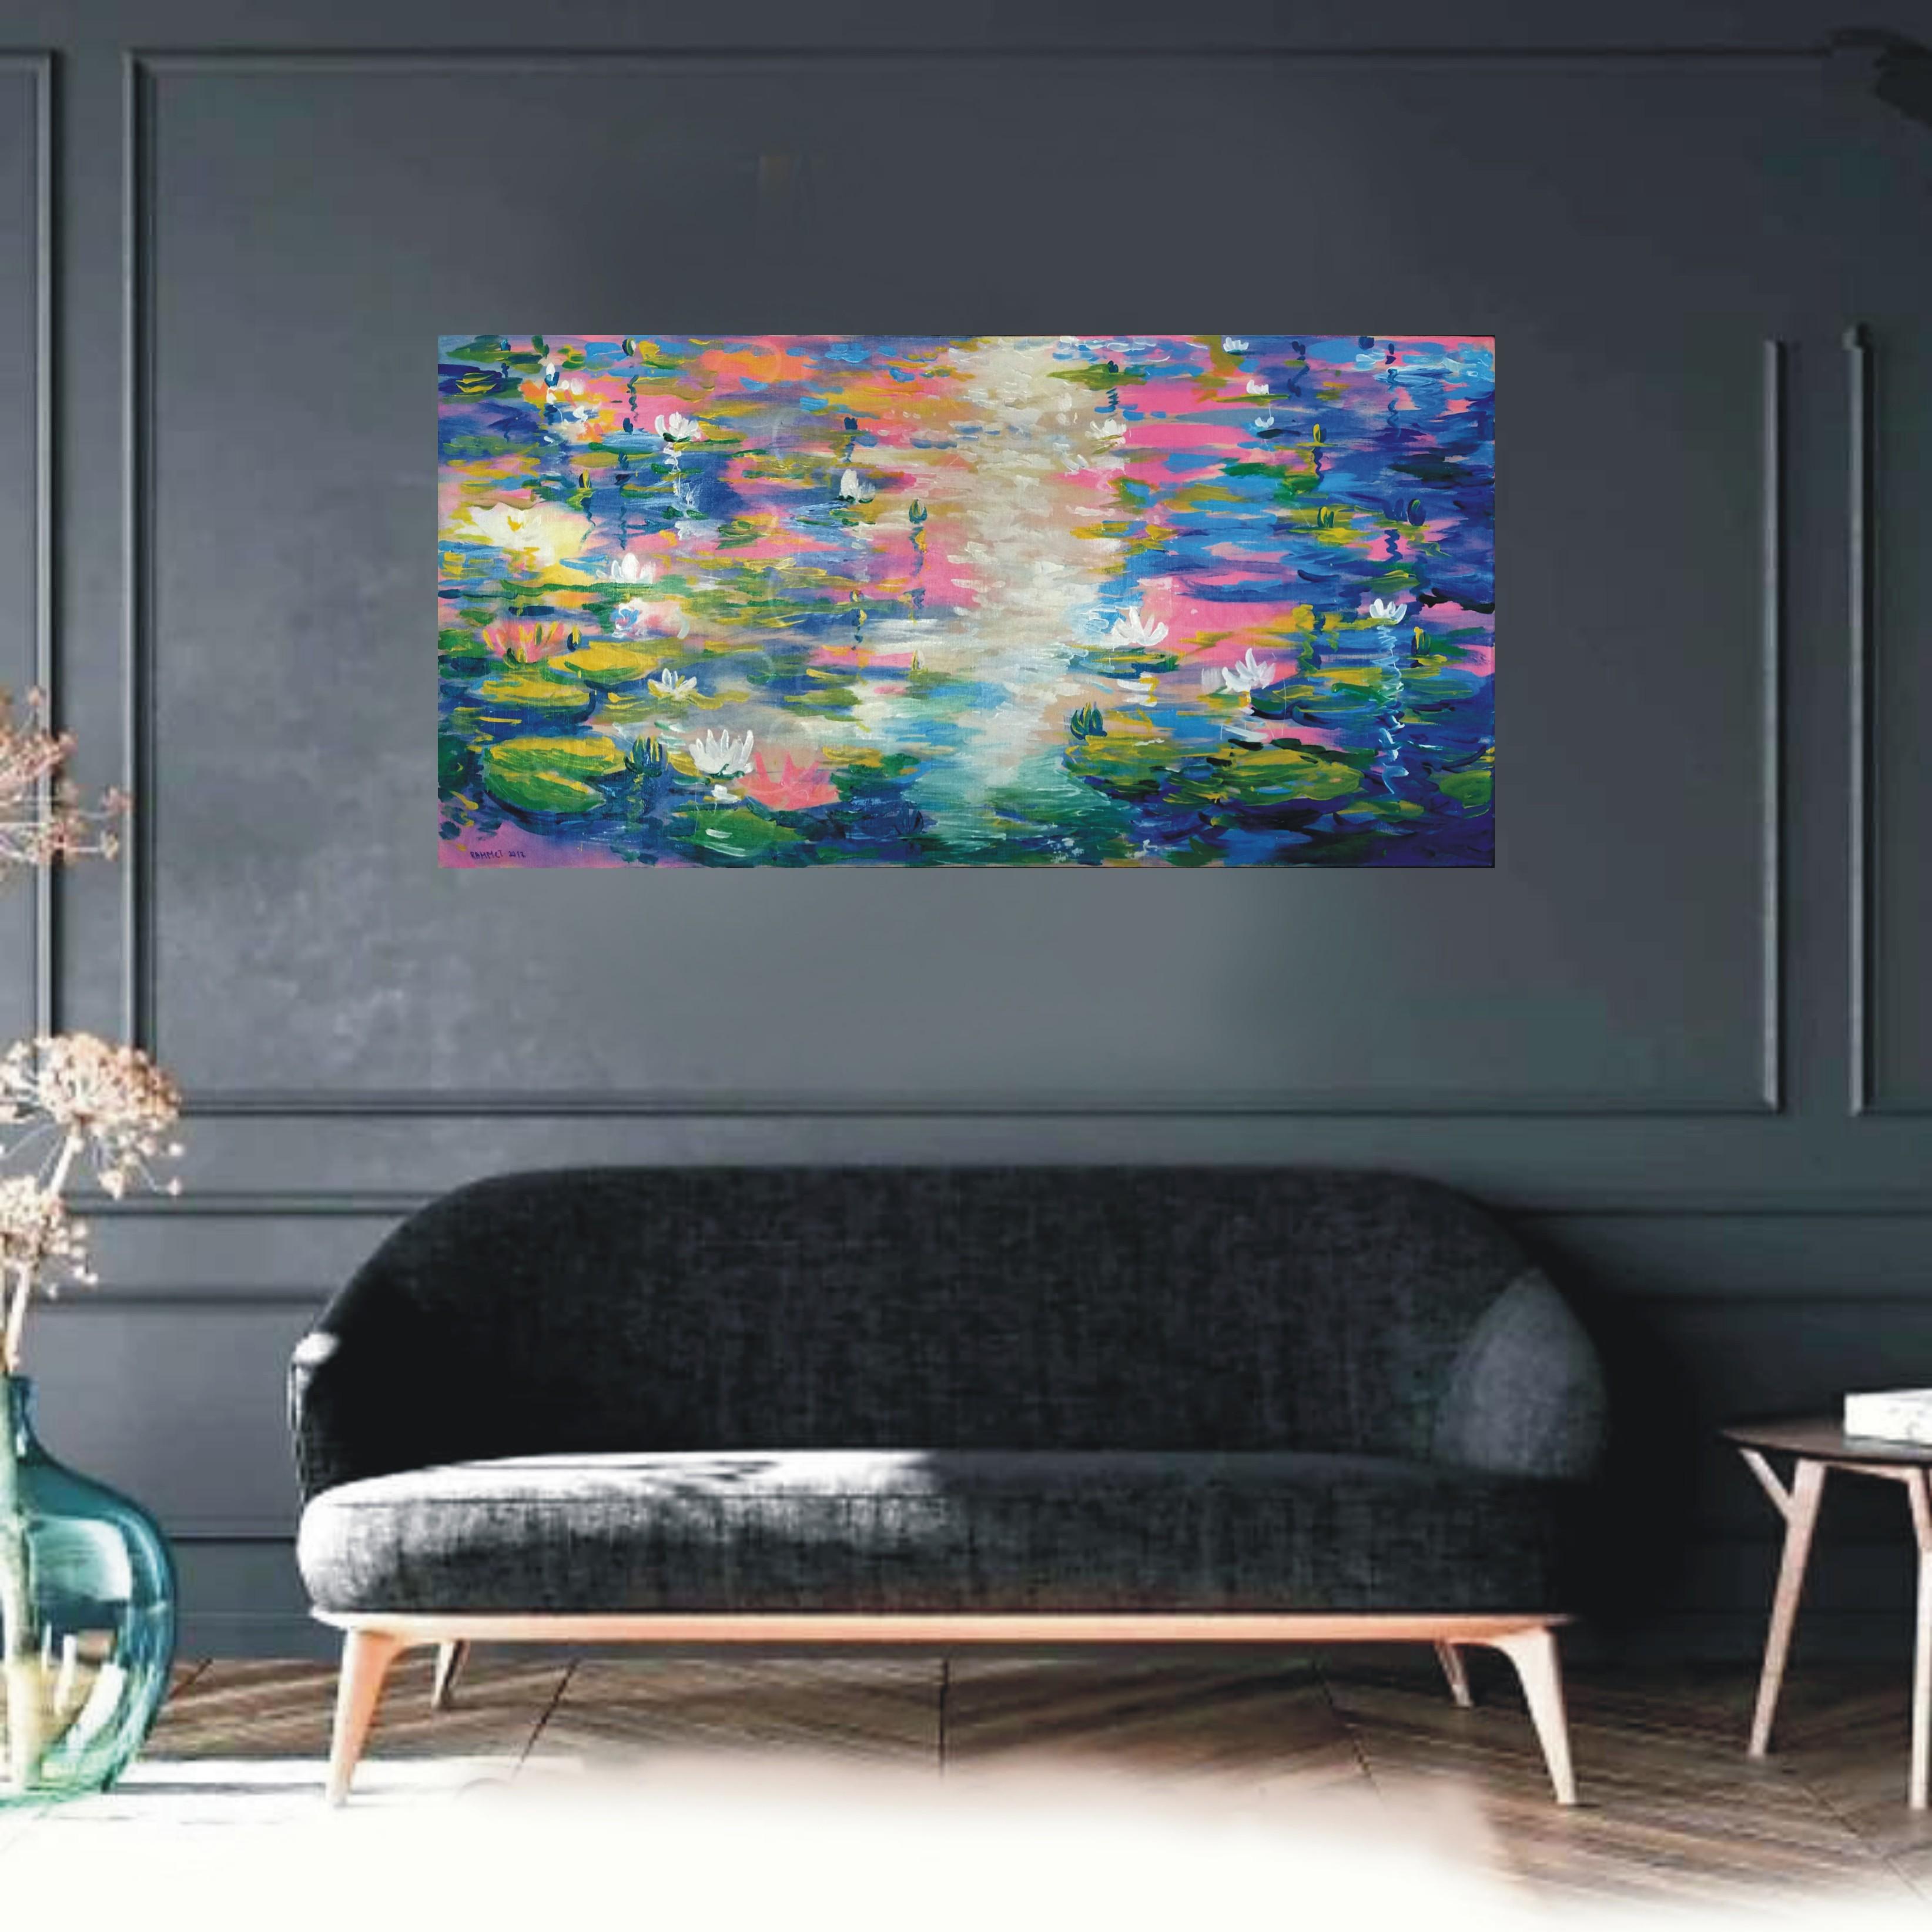 In this vibrant fusion of acrylic and oil, my emotions waltzed across the canvas, creating a symphony of hues. Inspired by the delicate dance of light and reflections, this painting is a brush-stroked love letter, flirting with impressionism and